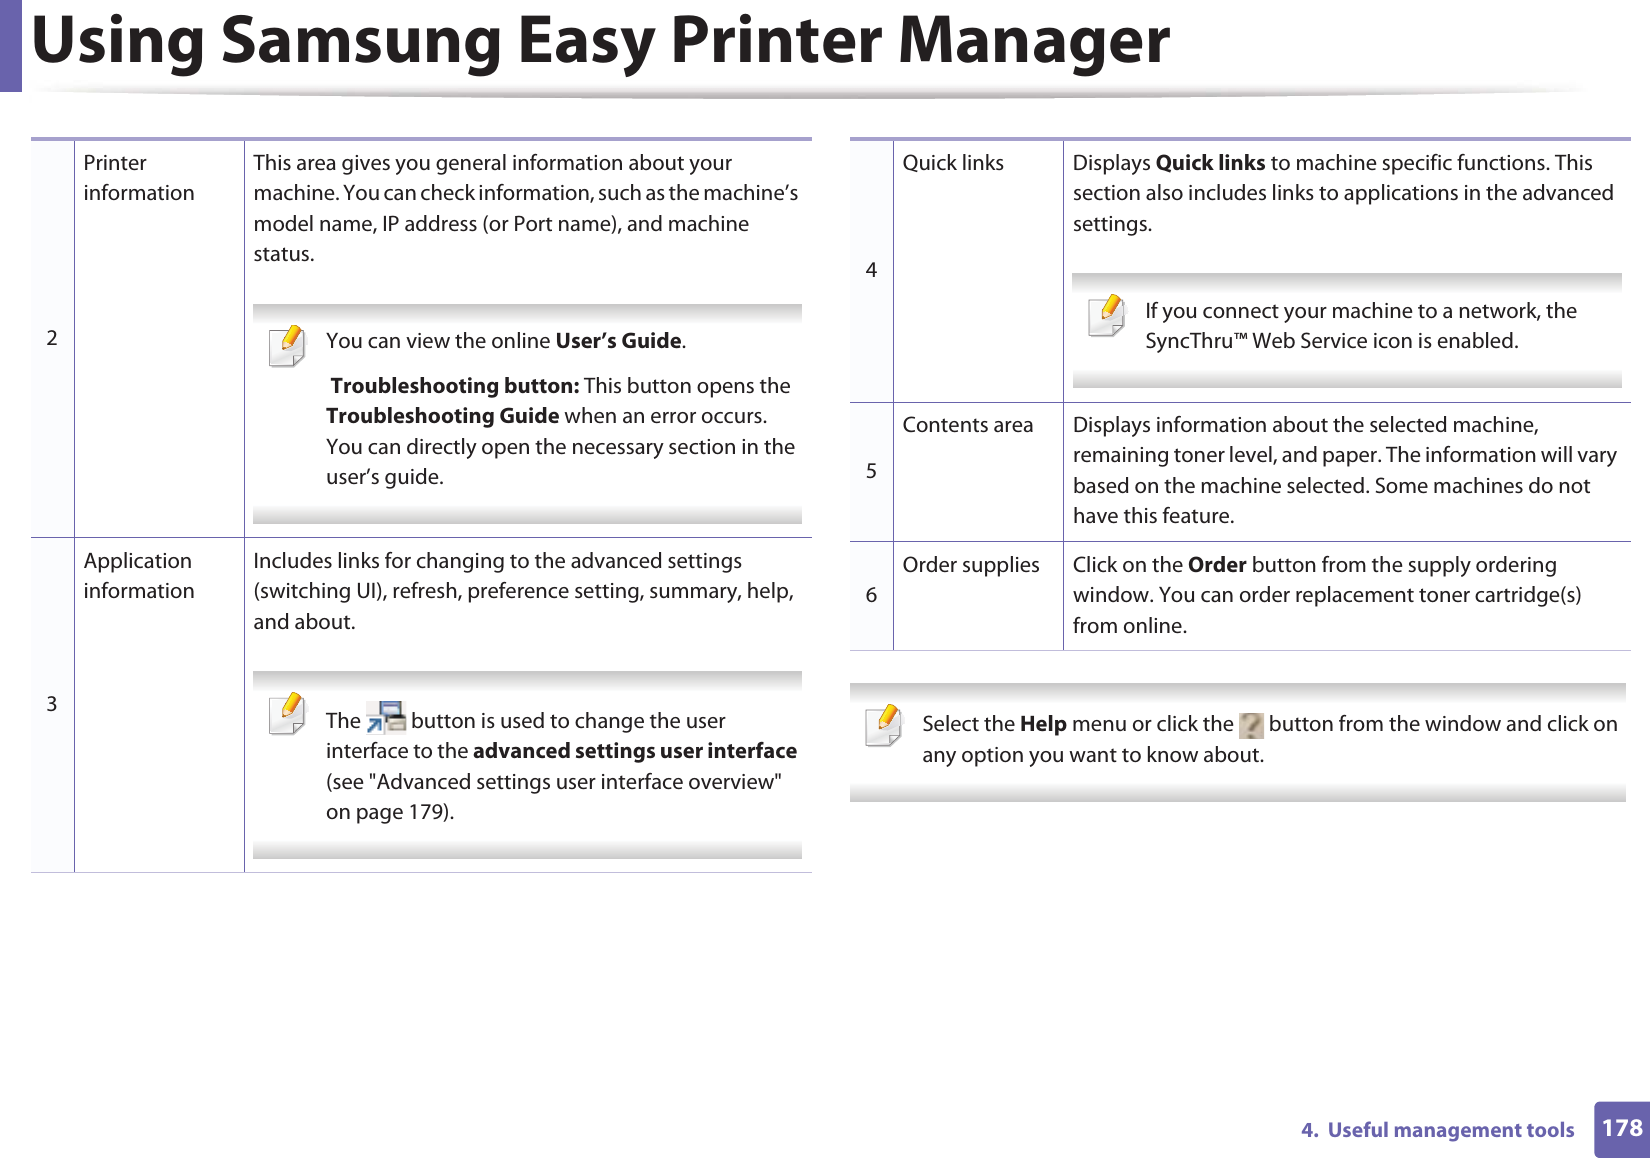 Using Samsung Easy Printer Manager1784.  Useful management tools Select the Help menu or click the   button from the window and click on any option you want to know about.  2Printer informationThis area gives you general information about your machine. You can check information, such as the machine’s model name, IP address (or Port name), and machine status. You can view the online User’s Guide. Troubleshooting button: This button opens the Troubleshooting Guide when an error occurs. You can directly open the necessary section in the user’s guide.  3Application informationIncludes links for changing to the advanced settings (switching UI), refresh, preference setting, summary, help, and about. The   button is used to change the user interface to the advanced settings user interface (see &quot;Advanced settings user interface overview&quot; on page 179). 4Quick links Displays Quick links to machine specific functions. This section also includes links to applications in the advanced settings. If you connect your machine to a network, the SyncThru™ Web Service icon is enabled. 5Contents area Displays information about the selected machine, remaining toner level, and paper. The information will vary based on the machine selected. Some machines do not have this feature.6Order supplies Click on the Order button from the supply ordering window. You can order replacement toner cartridge(s) from online.